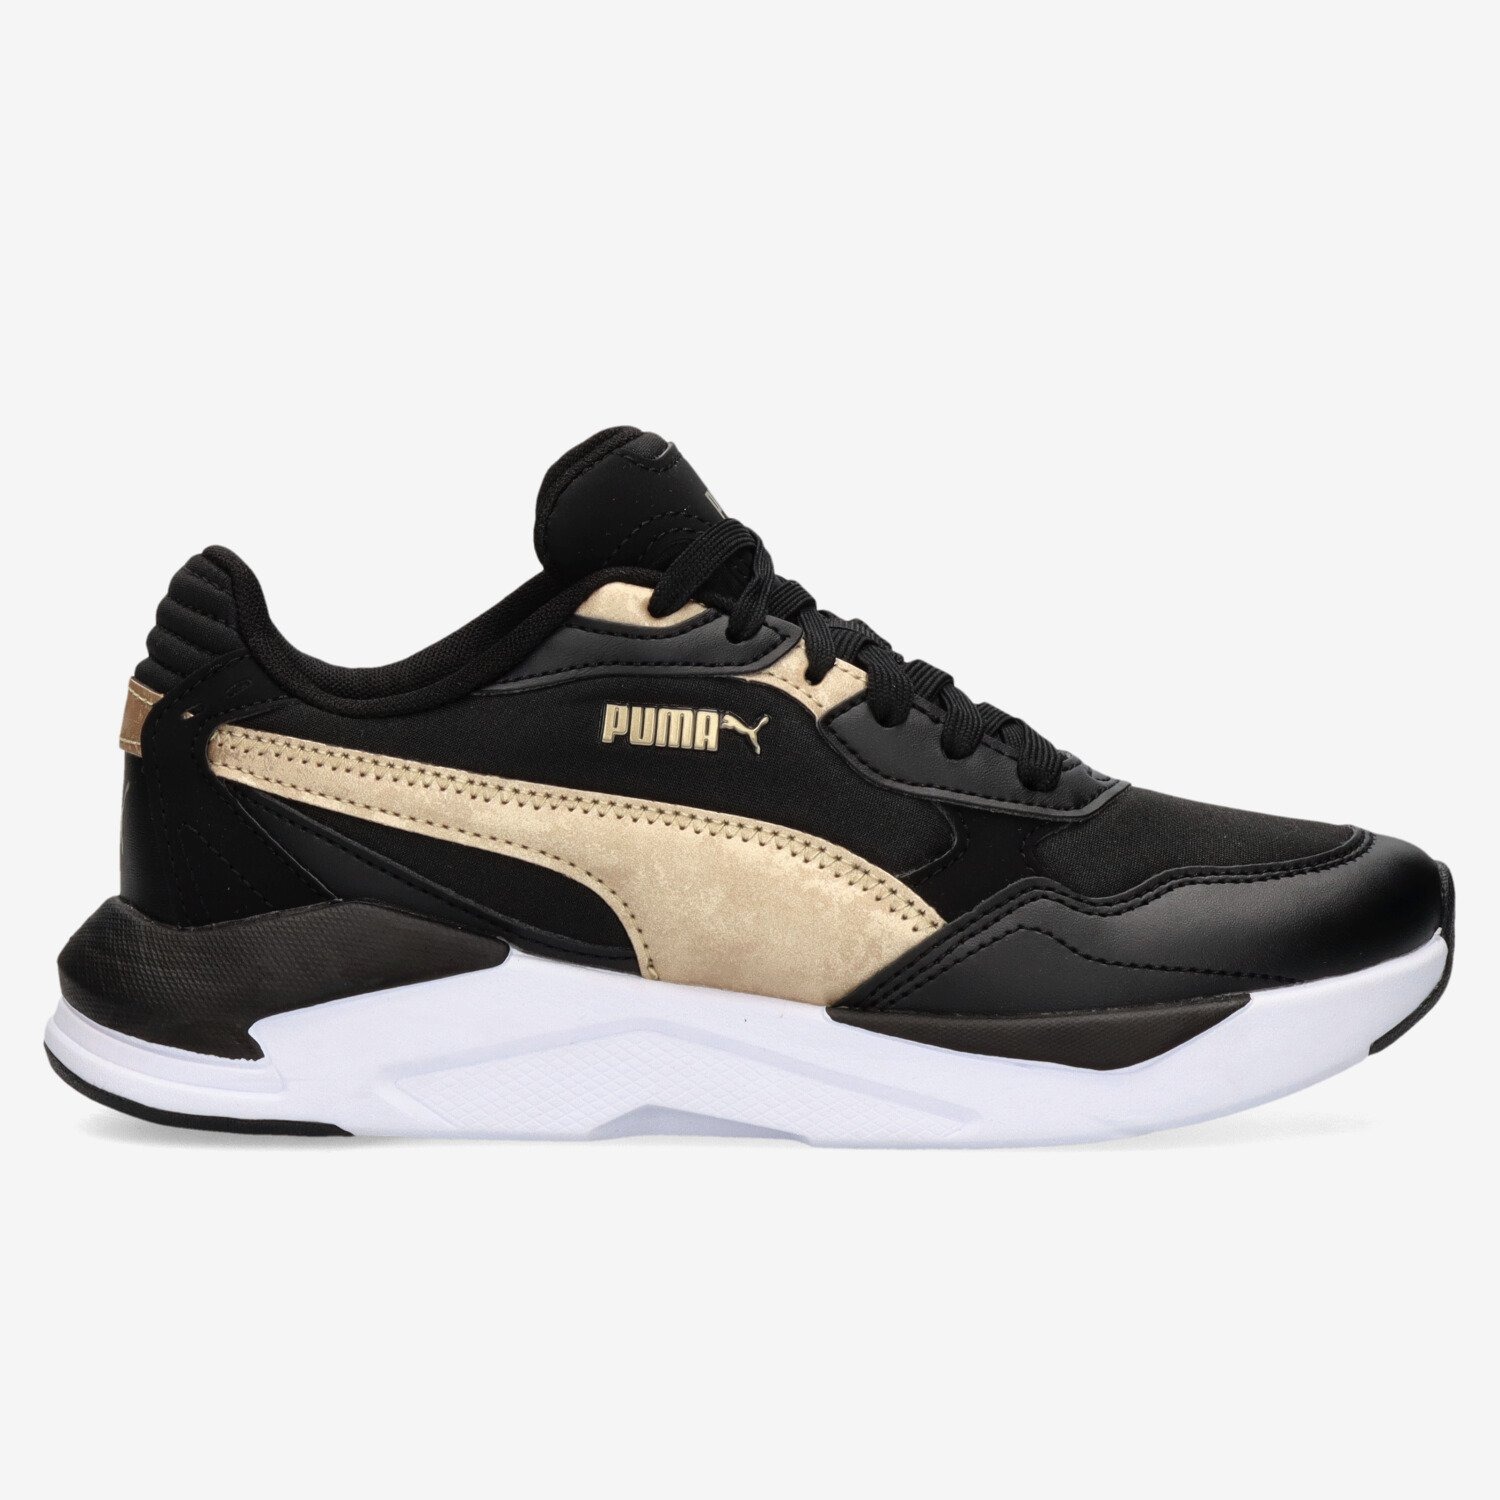 PUMA X-Ray Speed Lite Wns Dames Sneakers - Black/Gold - Maat 36